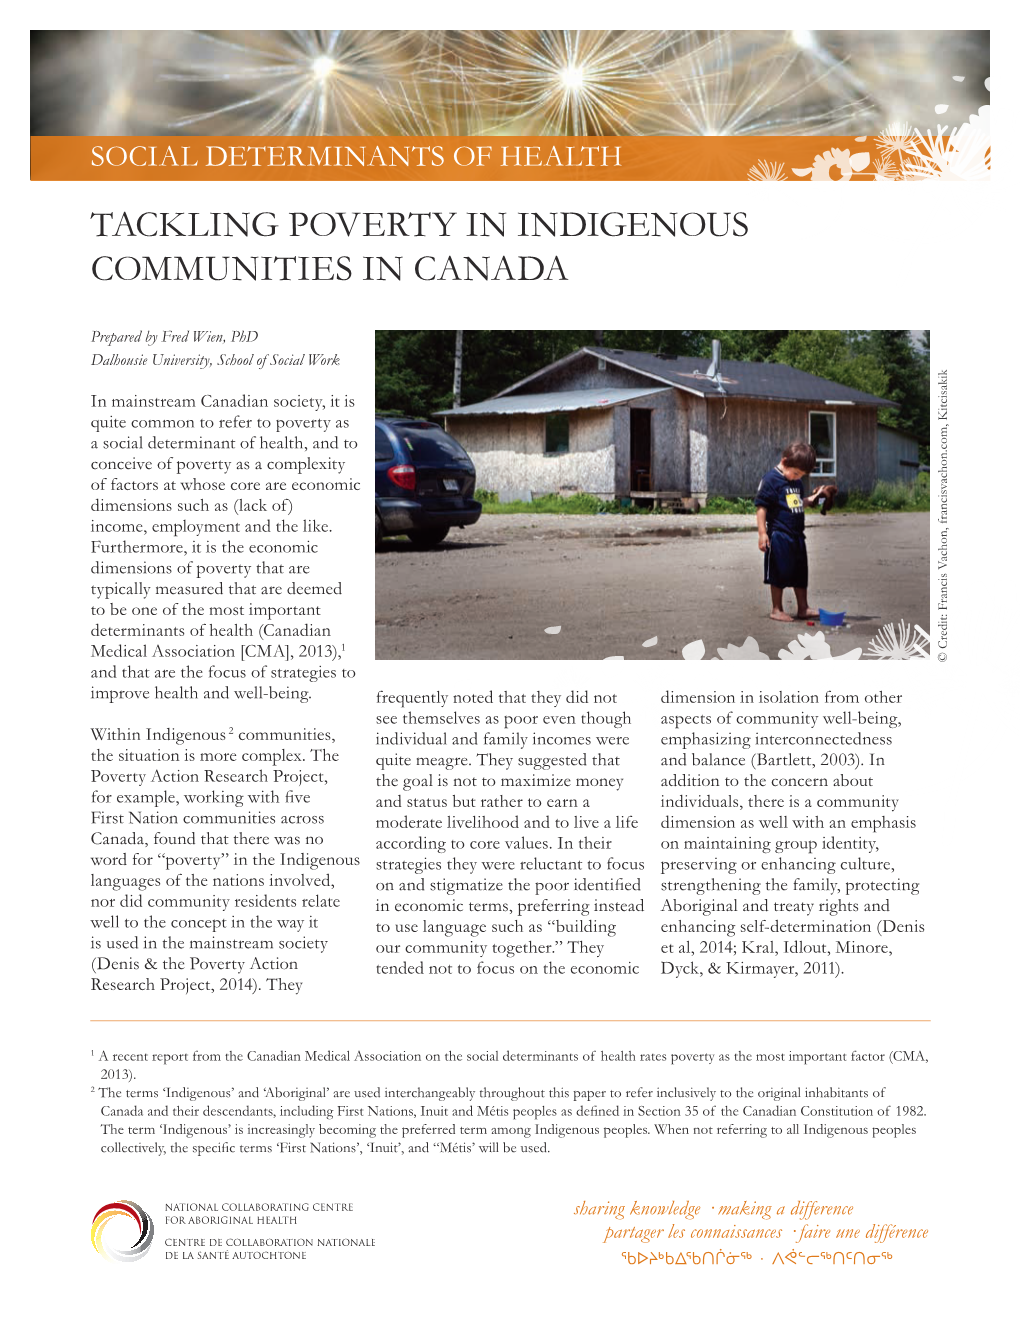 Tackling Poverty in Indigenous Communities in Canada